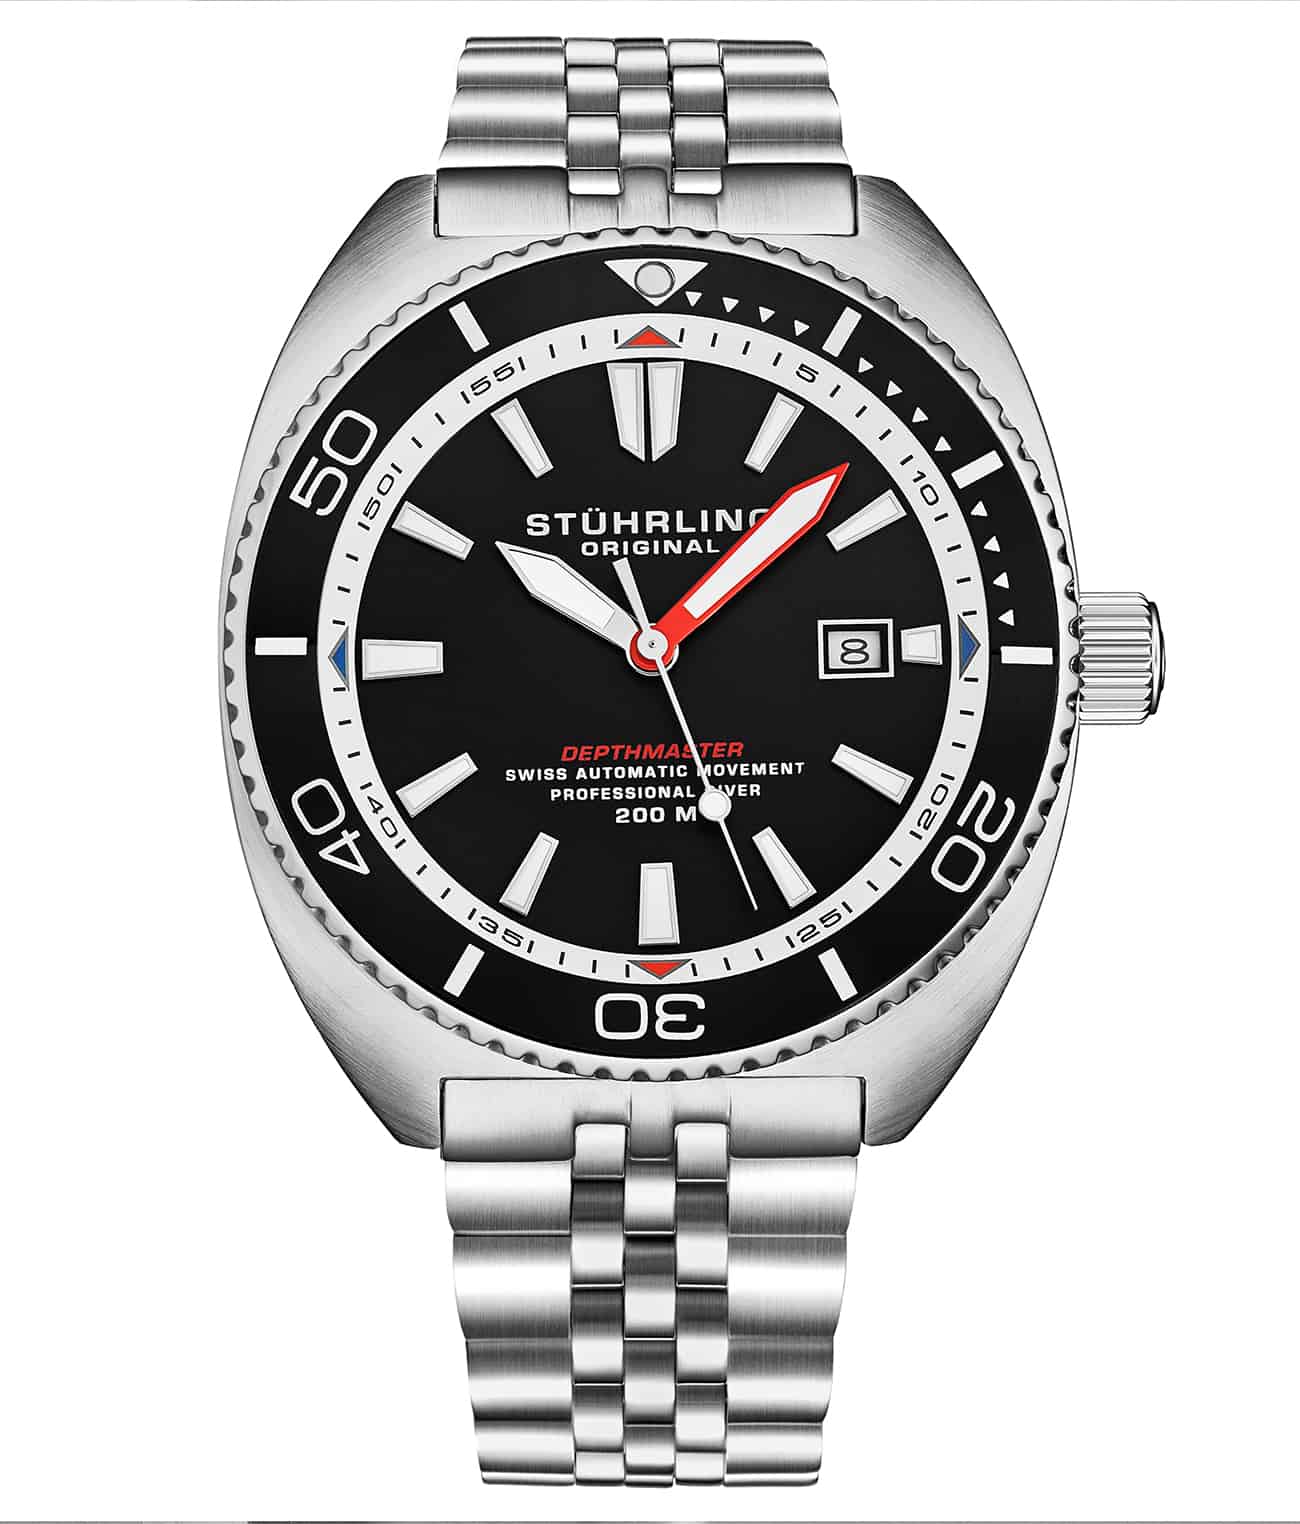 The Swiss Automatic Depthmaster 1008 45mm Diver